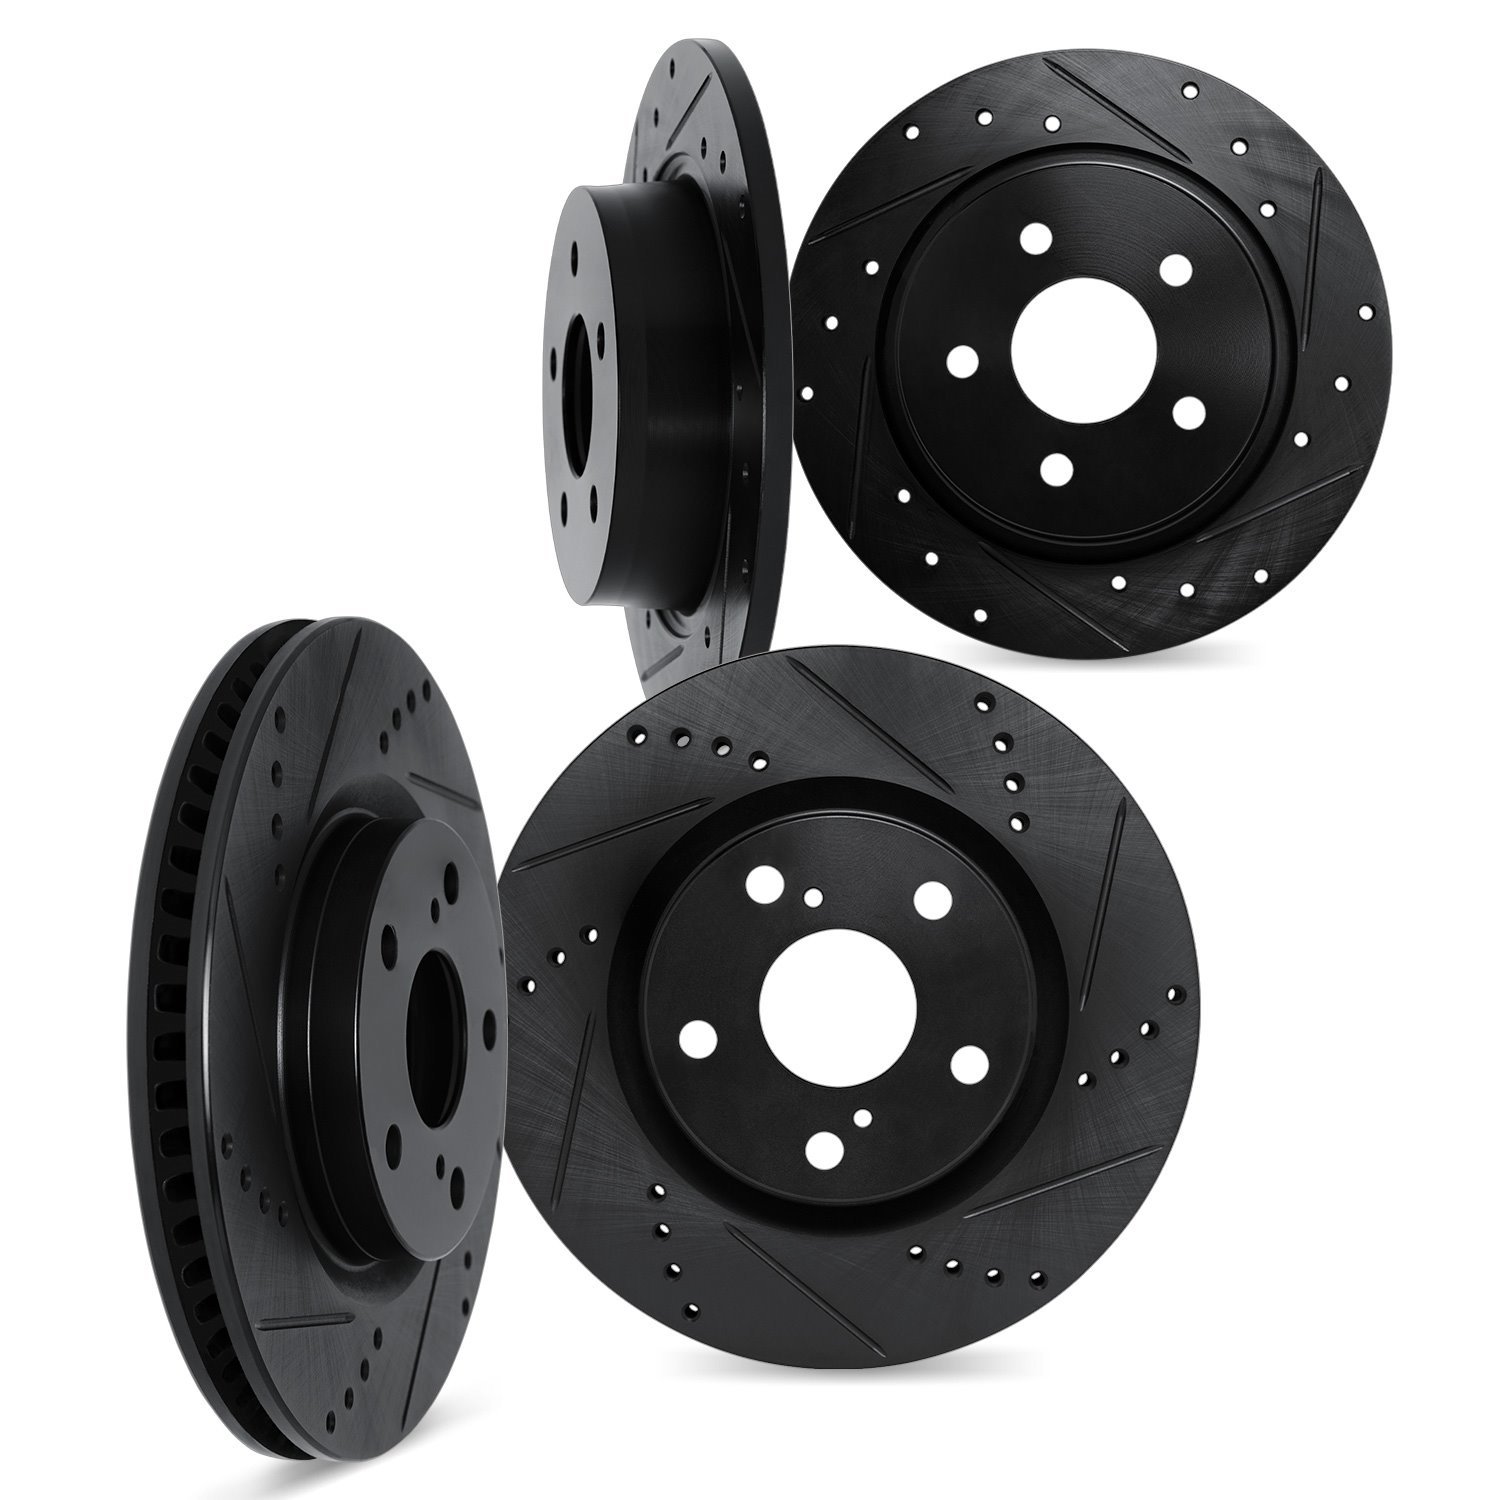 8004-58030 Drilled/Slotted Brake Rotors [Black], 2003-2011 Acura/Honda, Position: Front and Rear